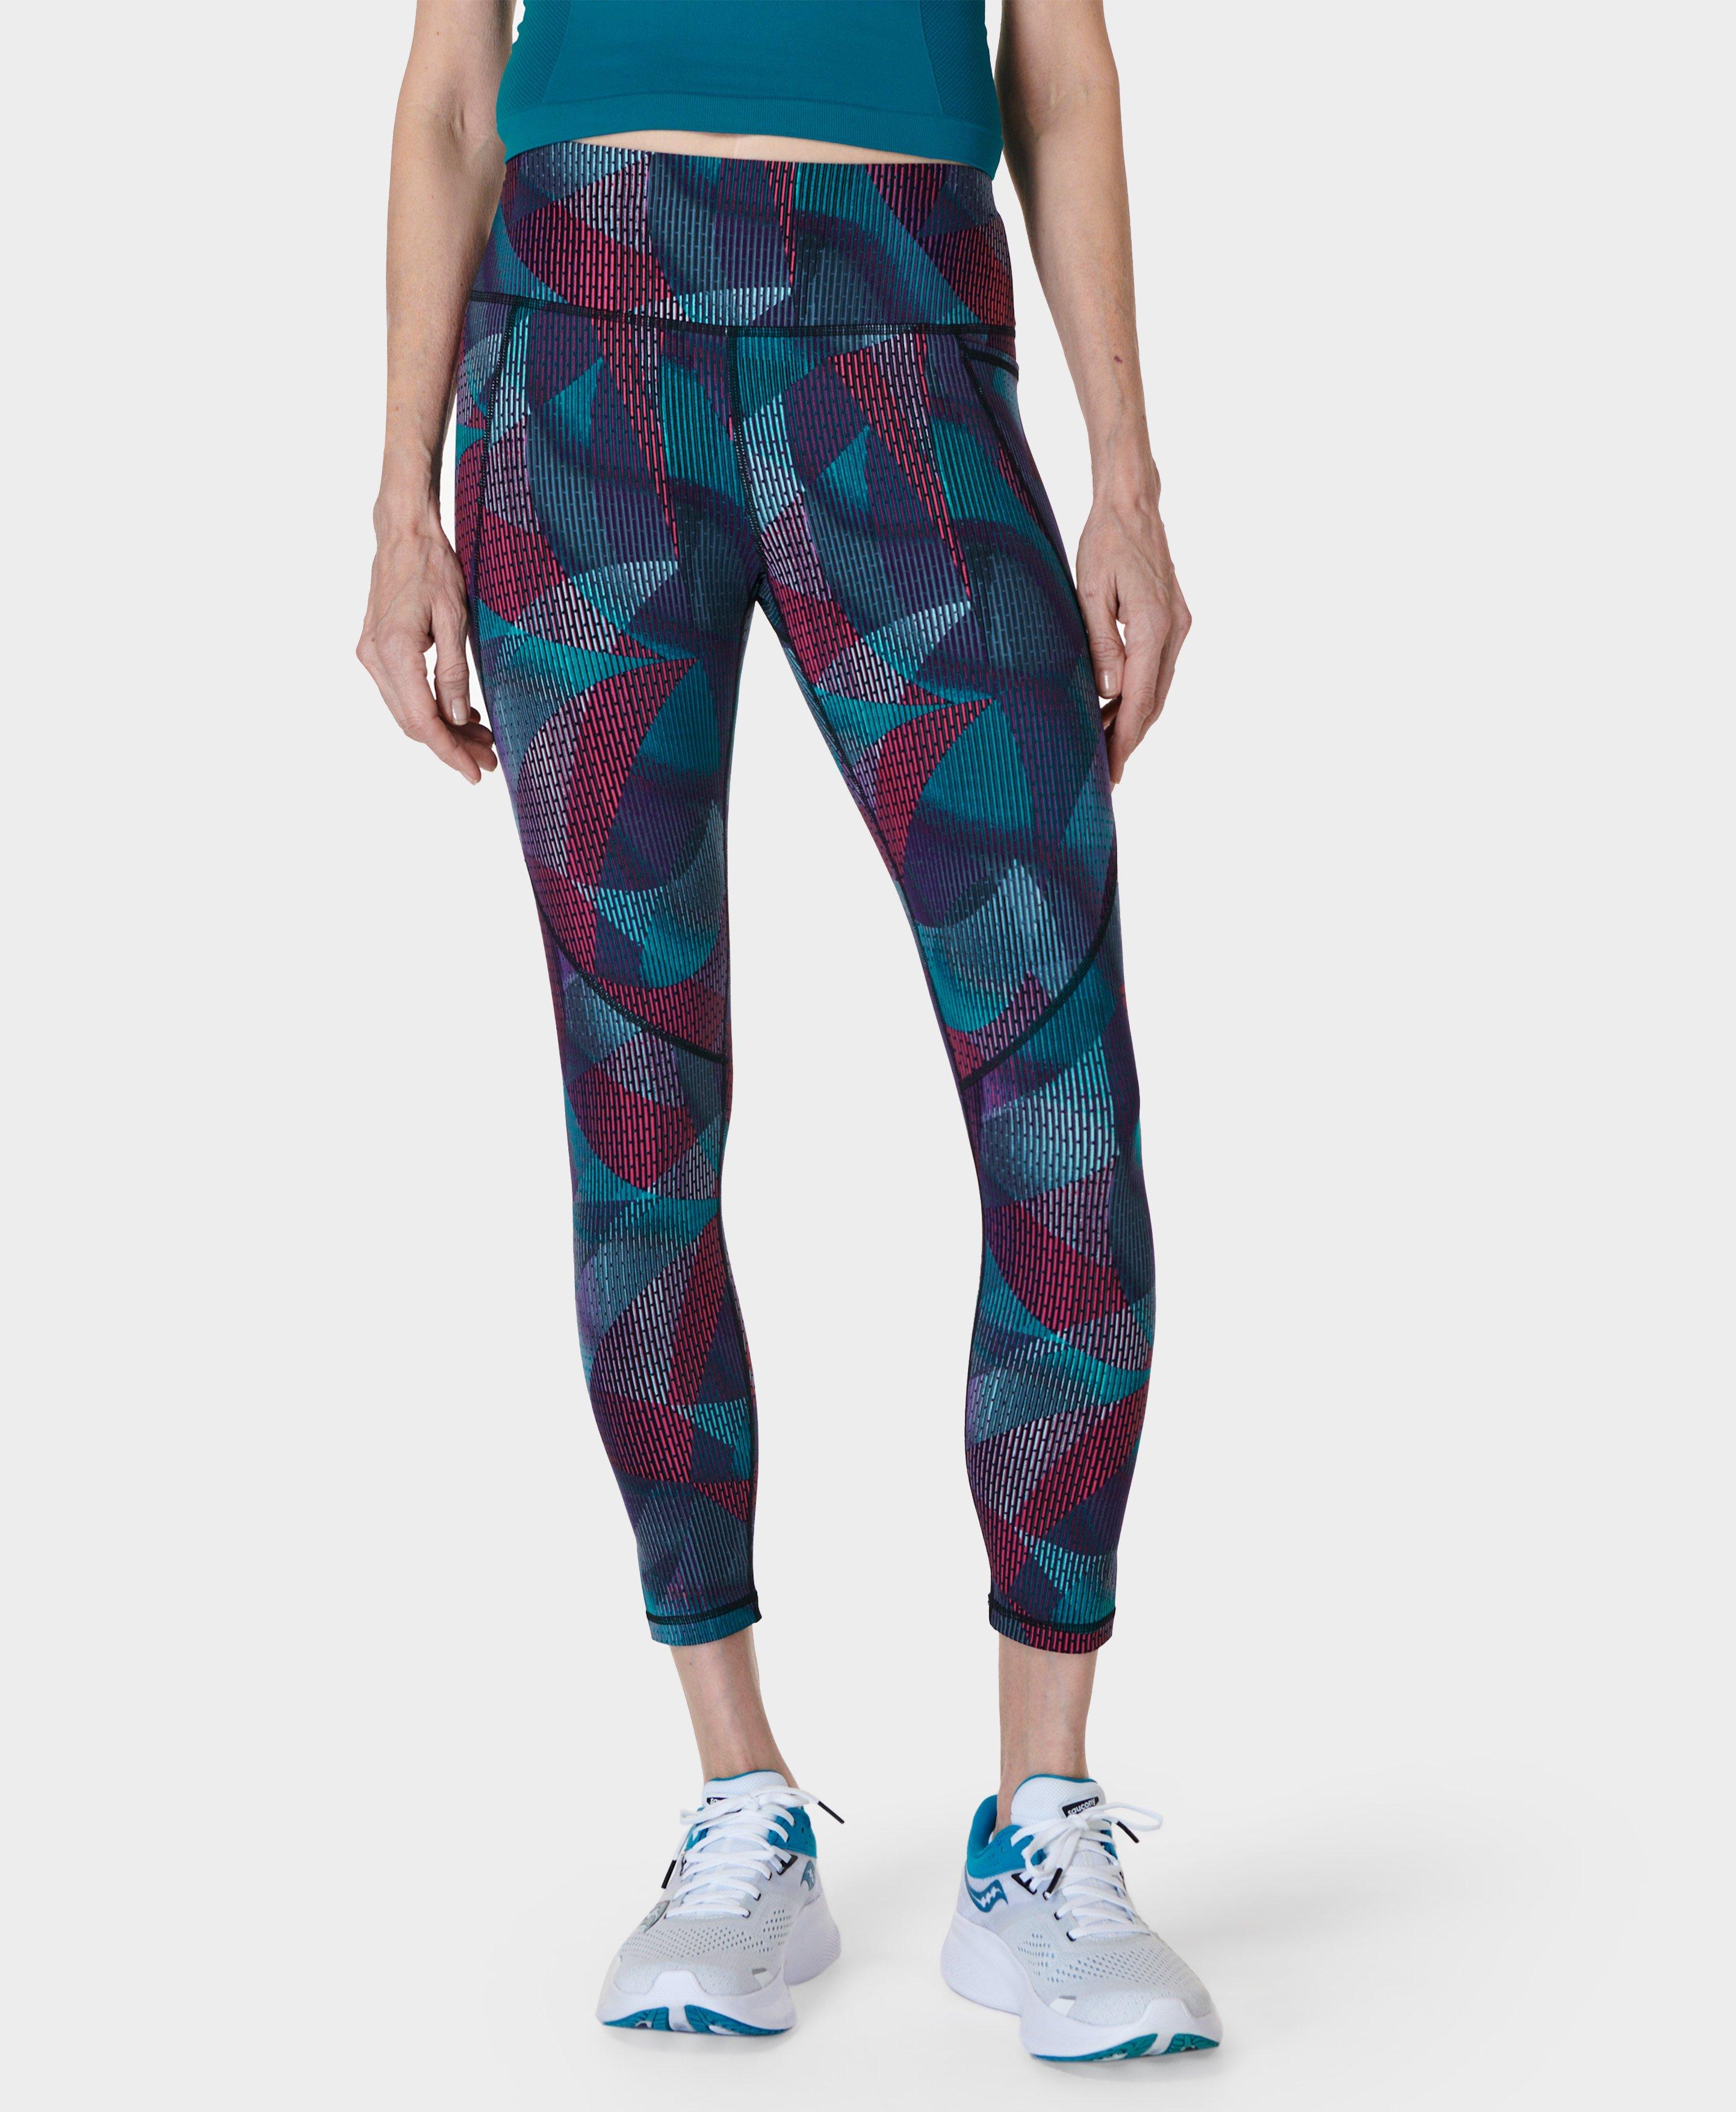 Awesome Highly Colorful and Comfortable Printed Workout Leggings! –  ConsciousValues